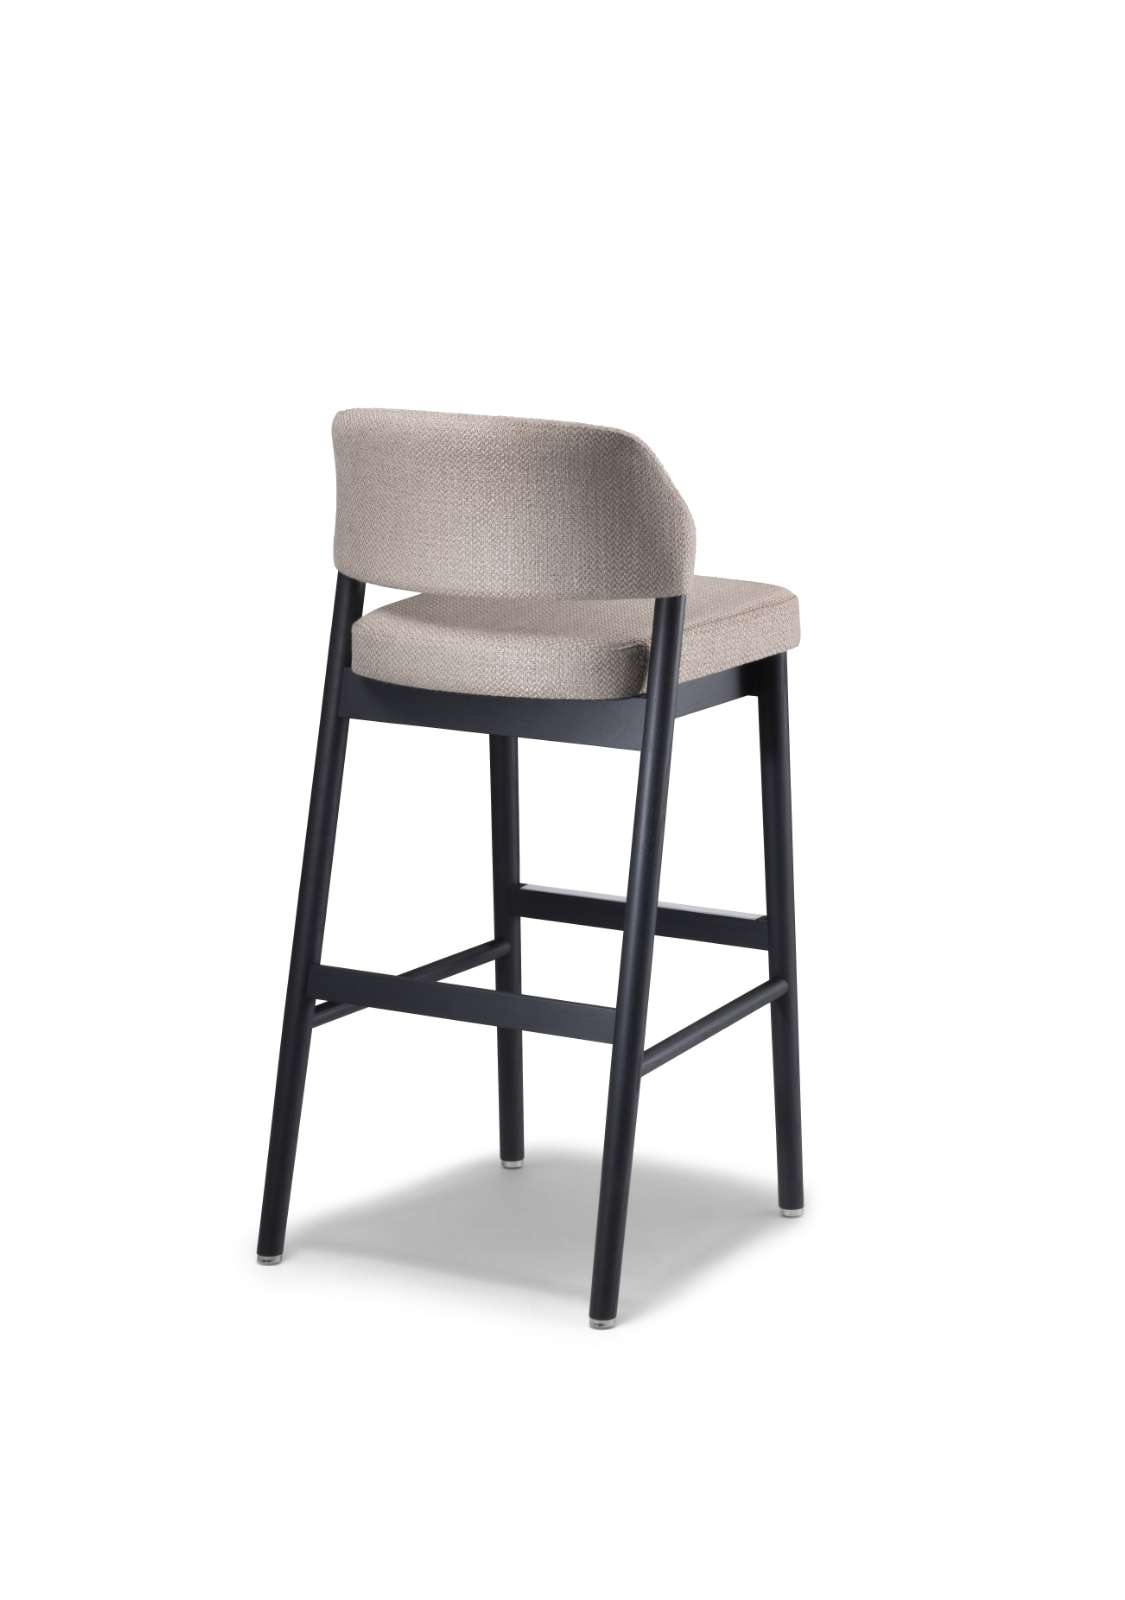 TANT-TANT COUNTER CHAIR